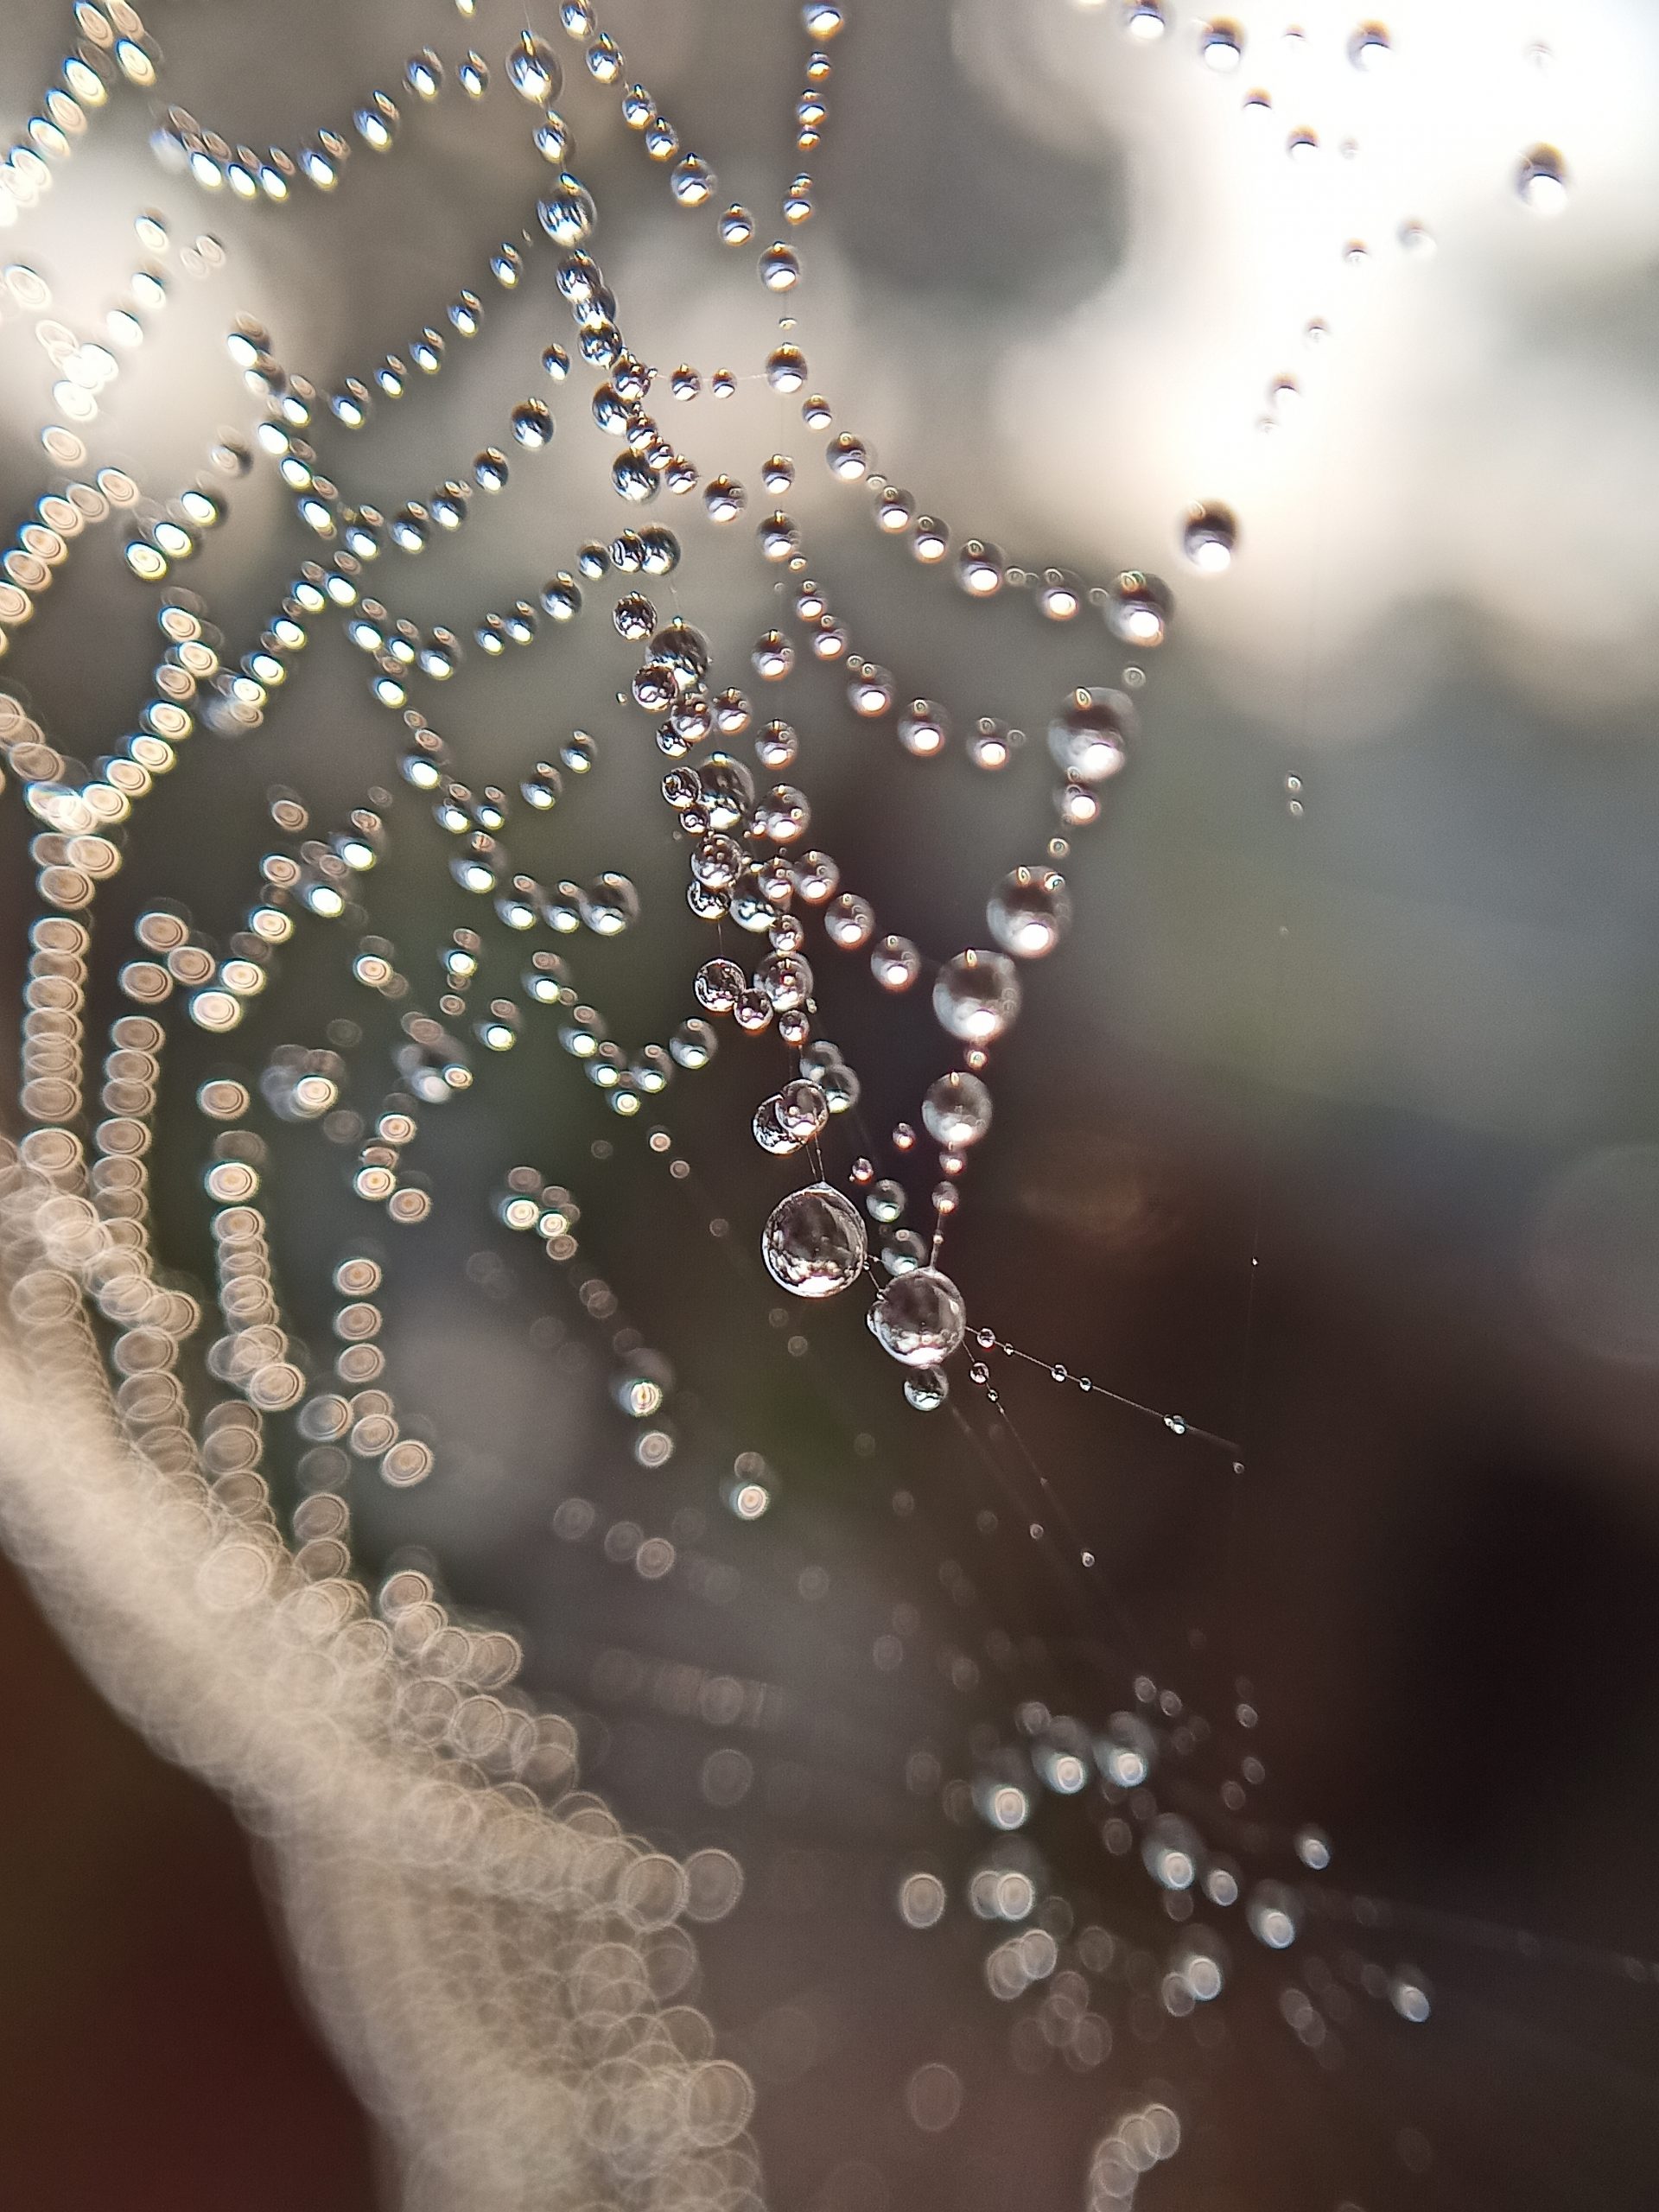 Water drops on a spiderweb